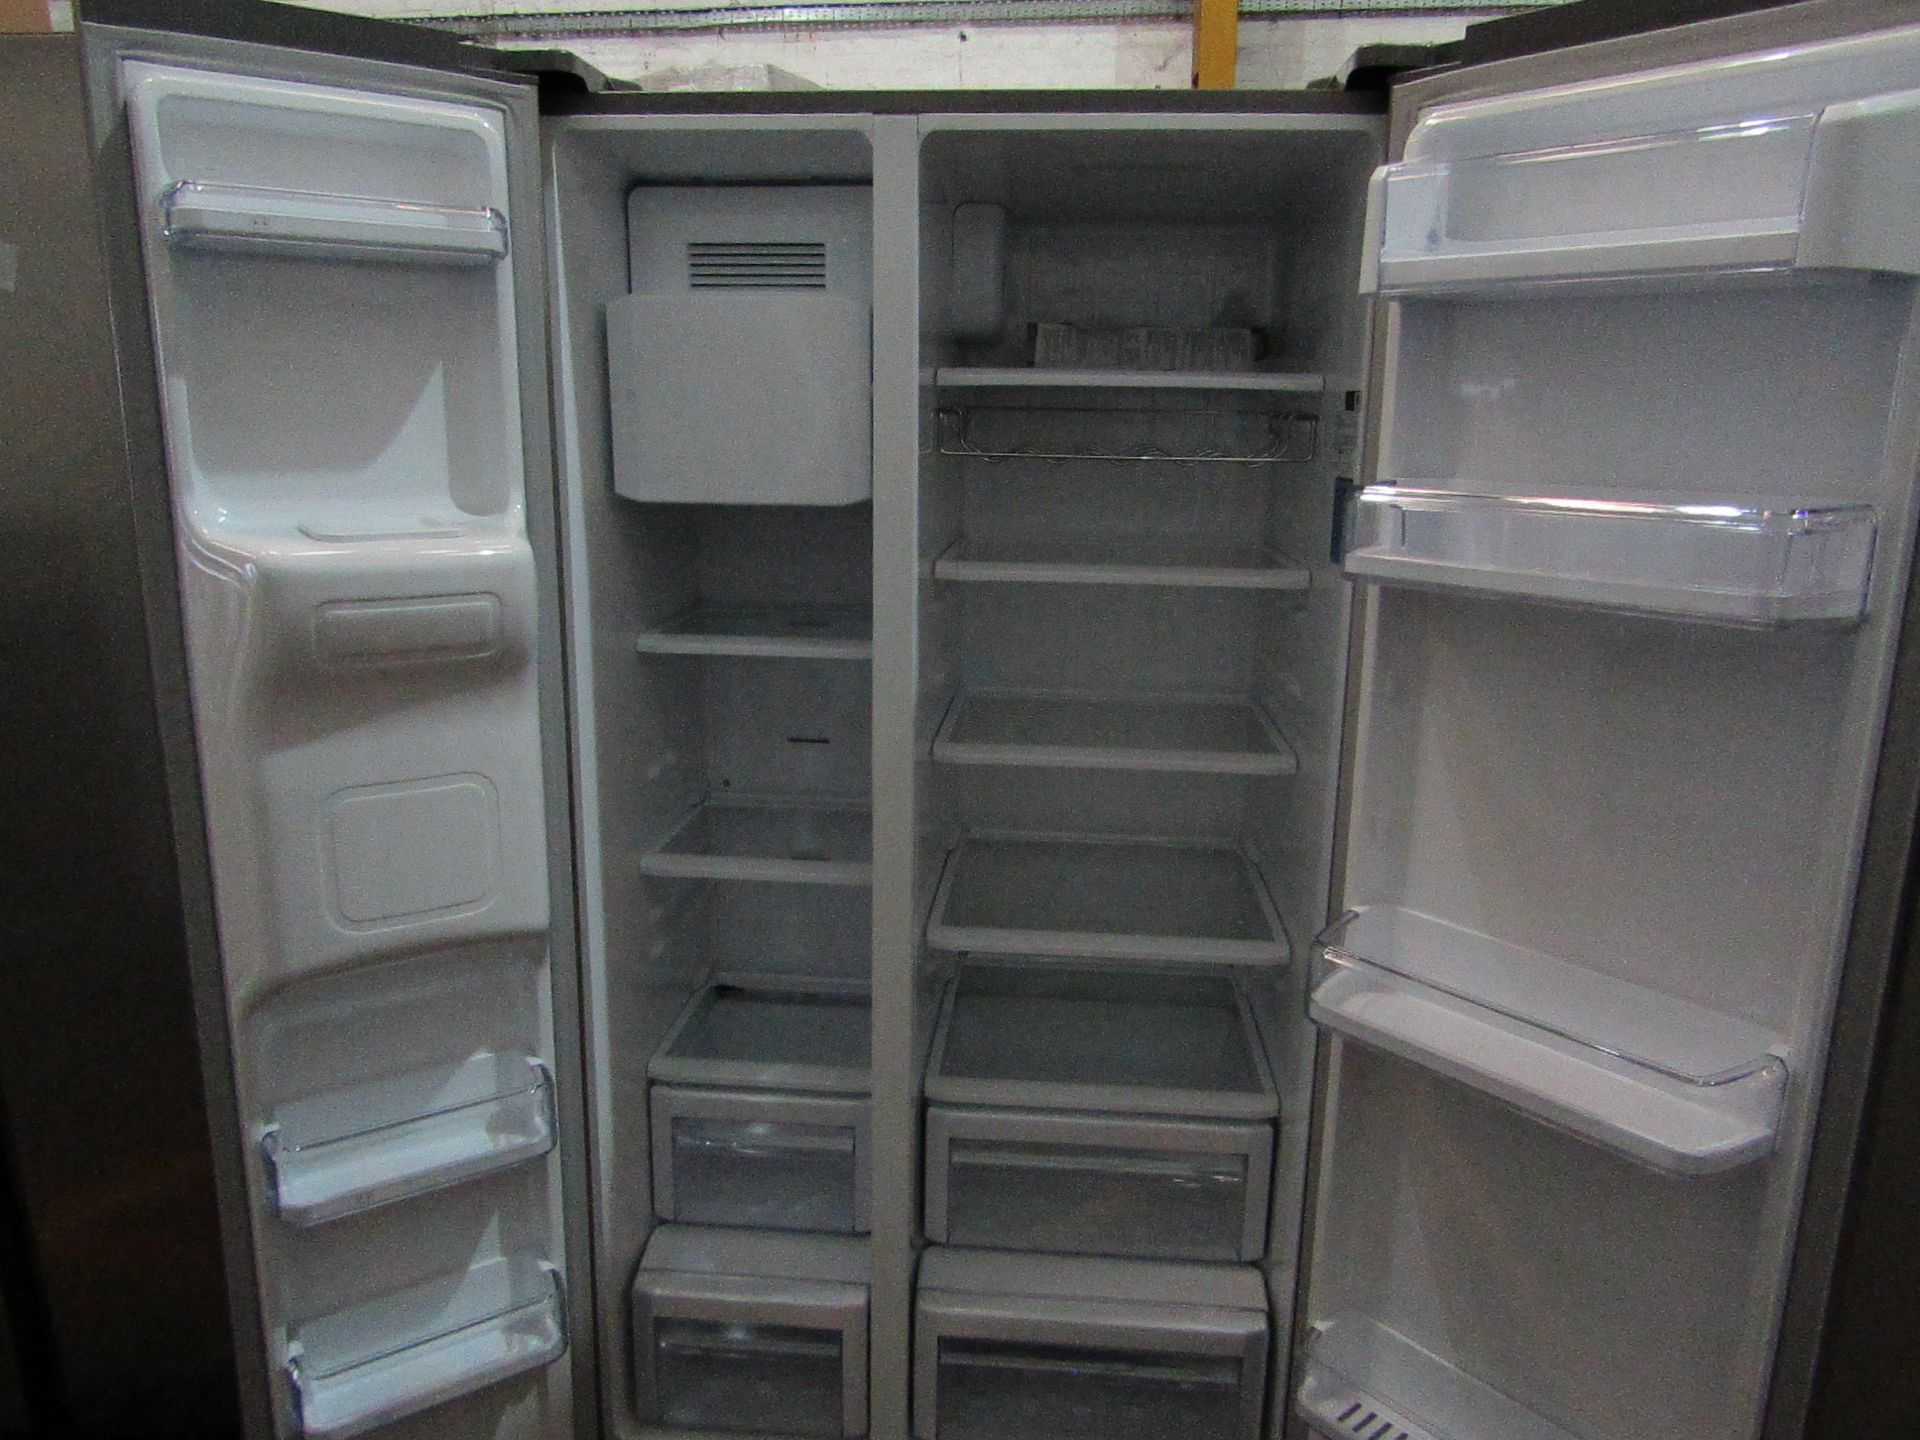 Samsung RS50N3513S8 american style fridge freezer, tested working for coldness but the water - Image 3 of 3